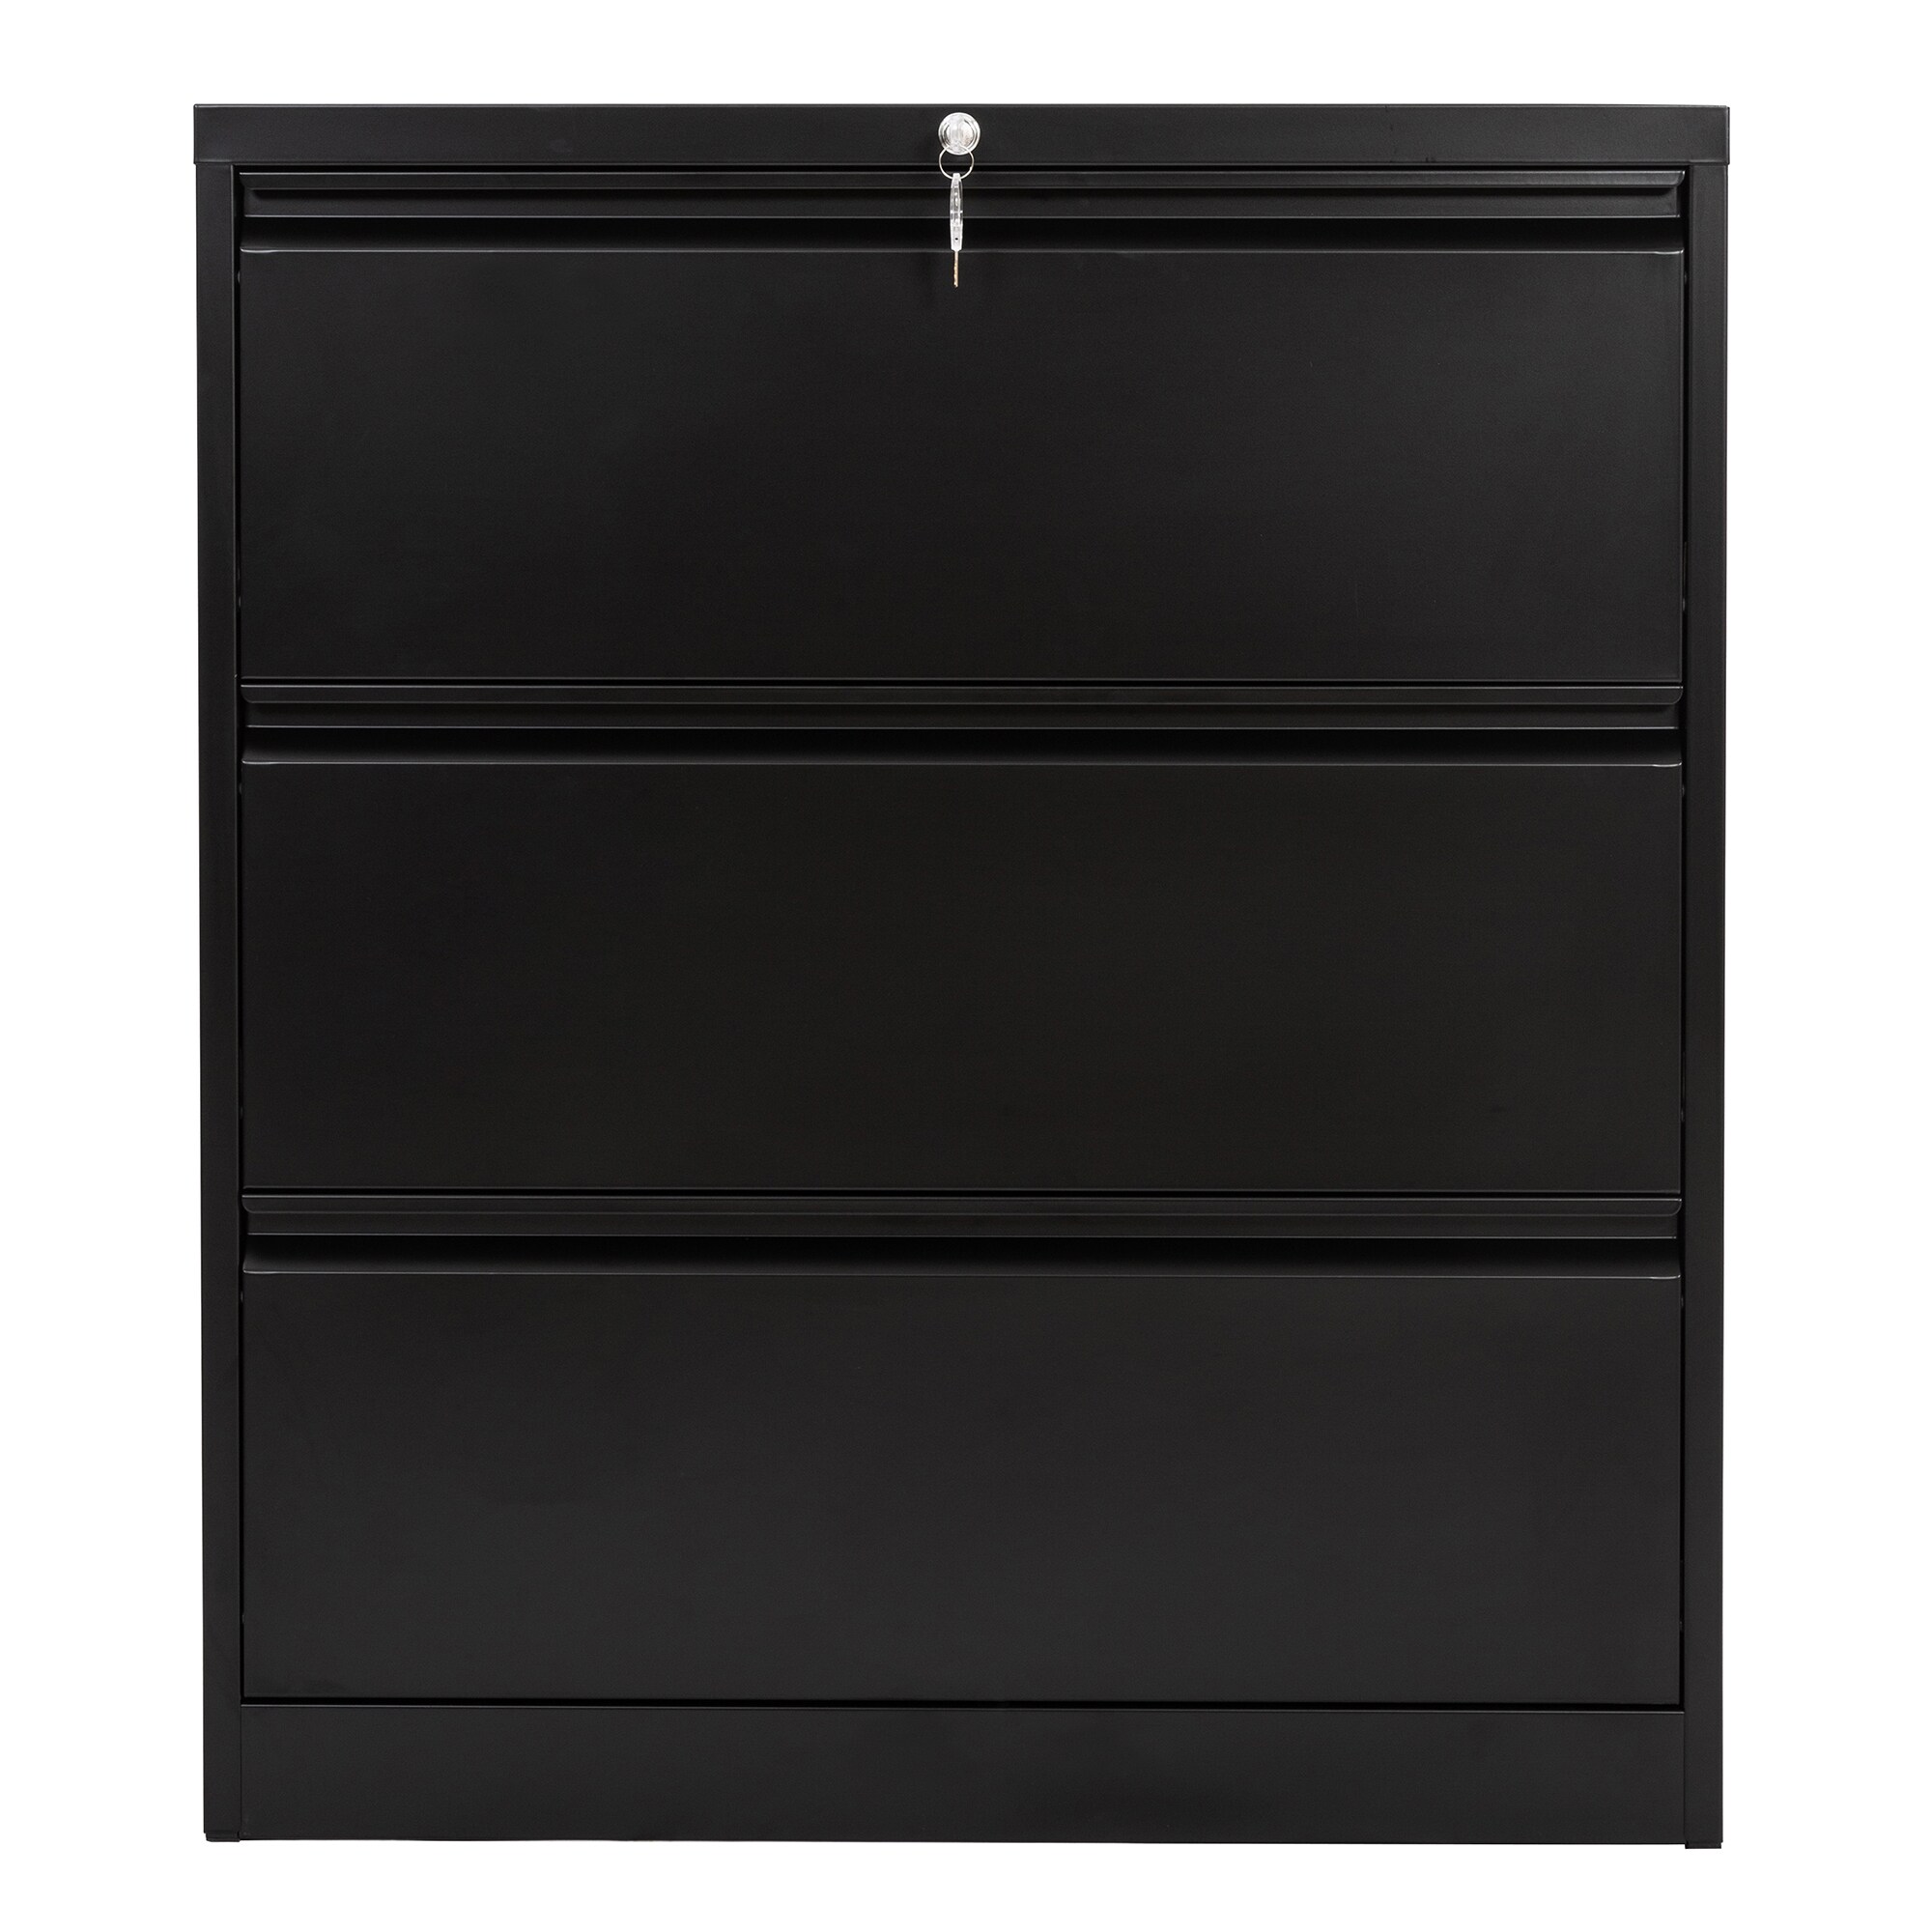 40.15 H x 35.43 W x 18.11 D SUXXAN Lateral Filing Cabinet,Metal Filing Cabinet with 3 Drawer,Locking Home Office Steel Files Cabinet with Letter/Legal Size,Anti-tilt Structure,Assembly Required 